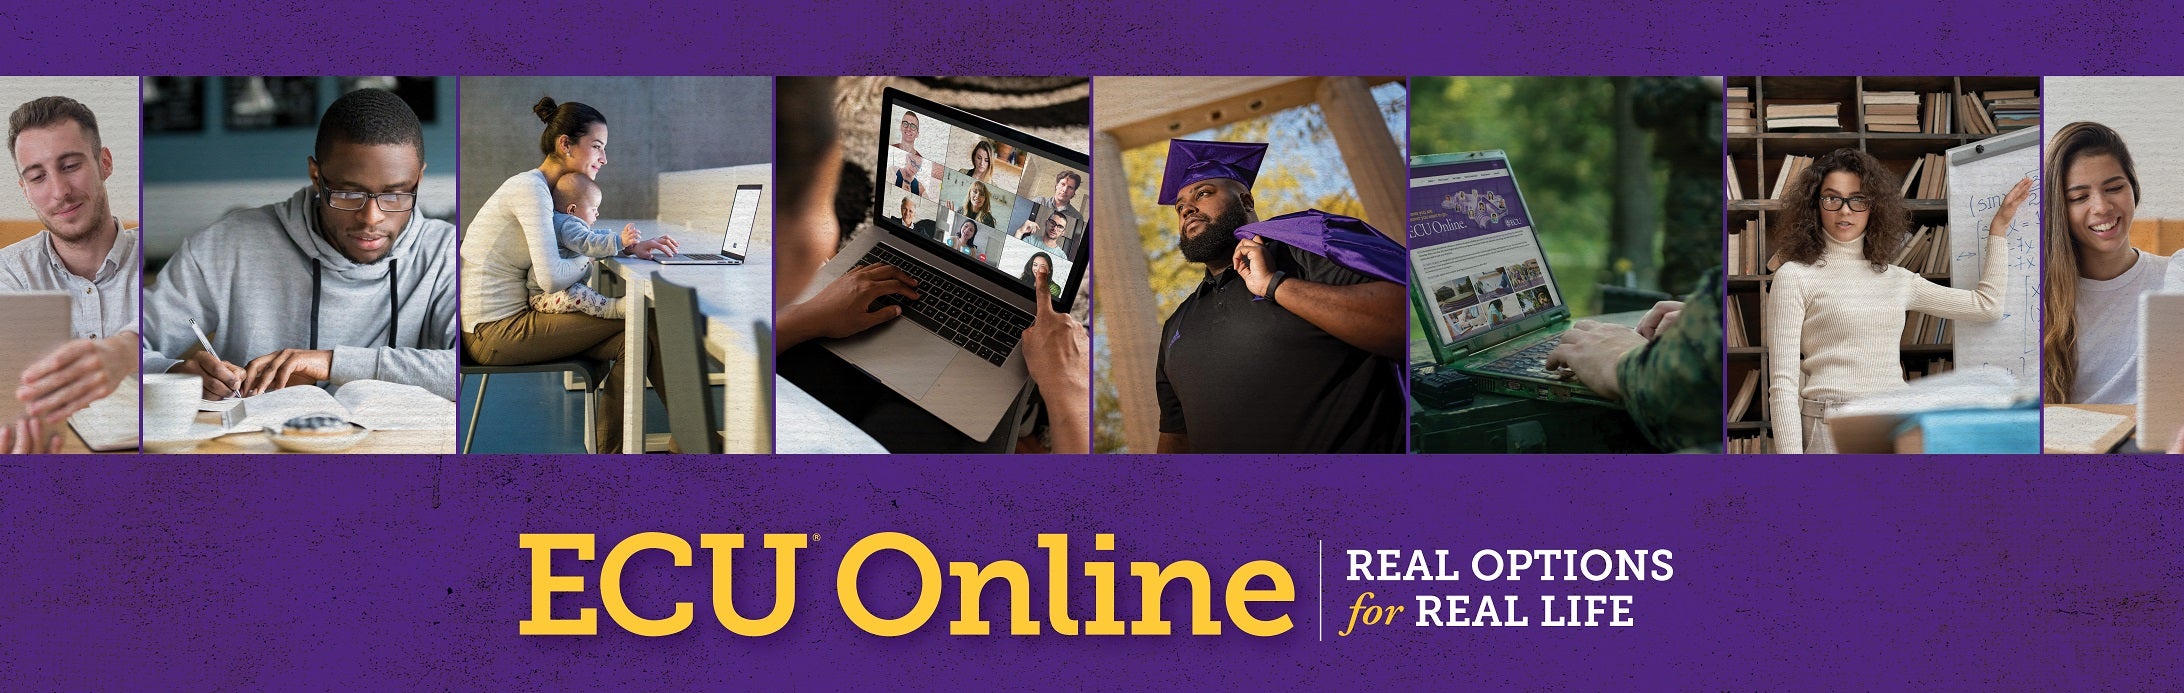 ECU Online. Real options for real life.